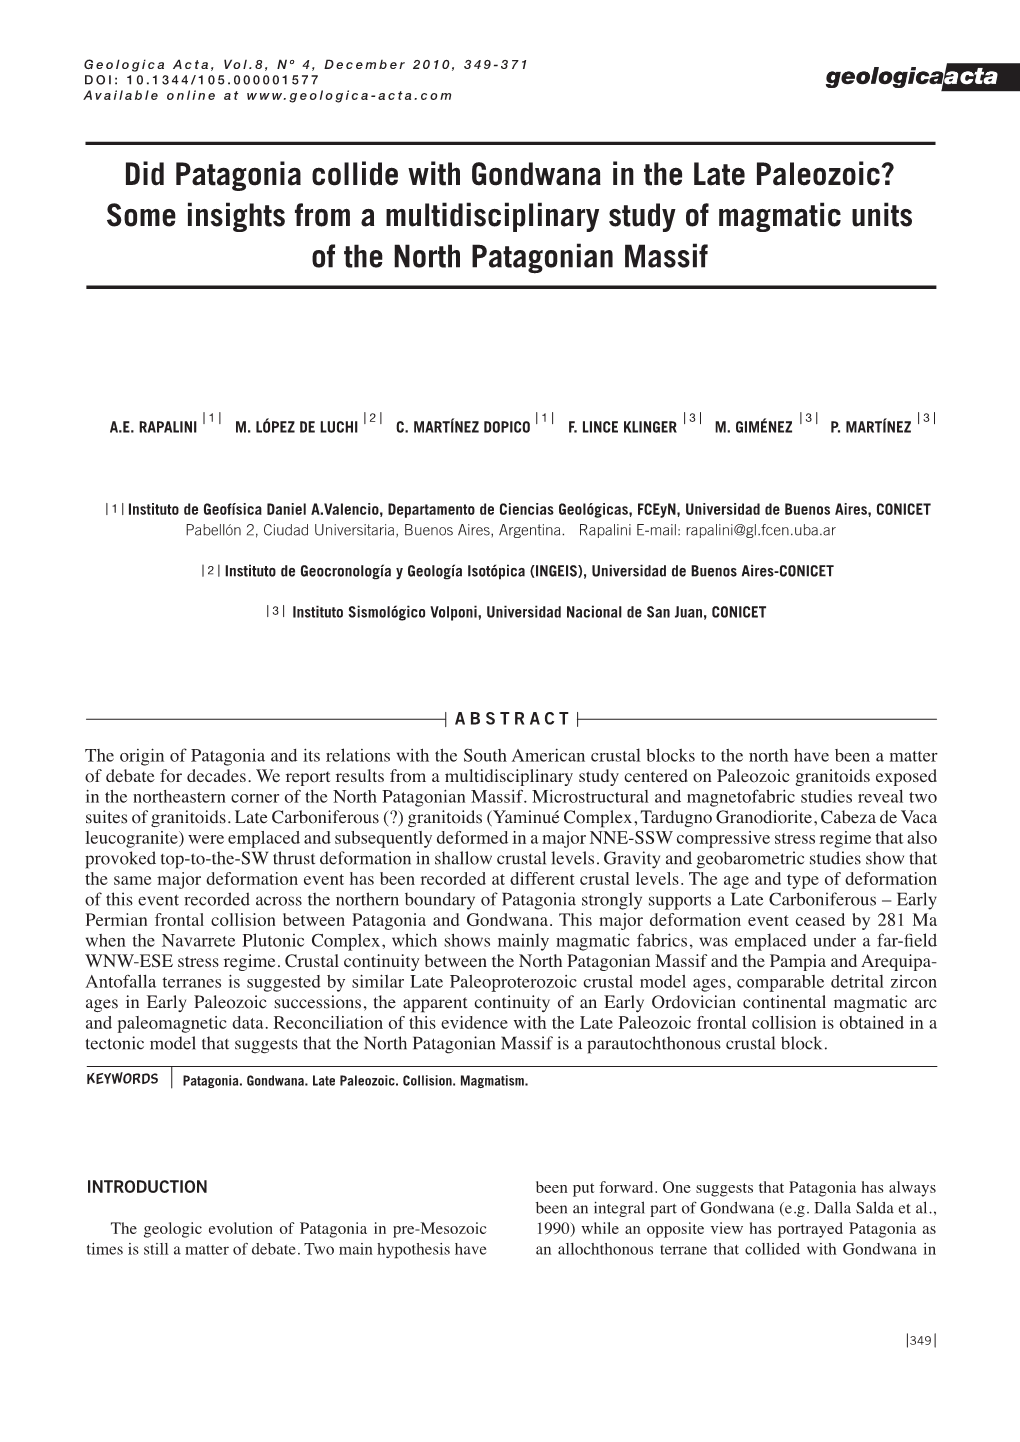 Did Patagonia Collide with Gondwana in the Late Paleozoic? Some Insights from a Multidisciplinary Study of Magmatic Units of the North Patagonian Massif